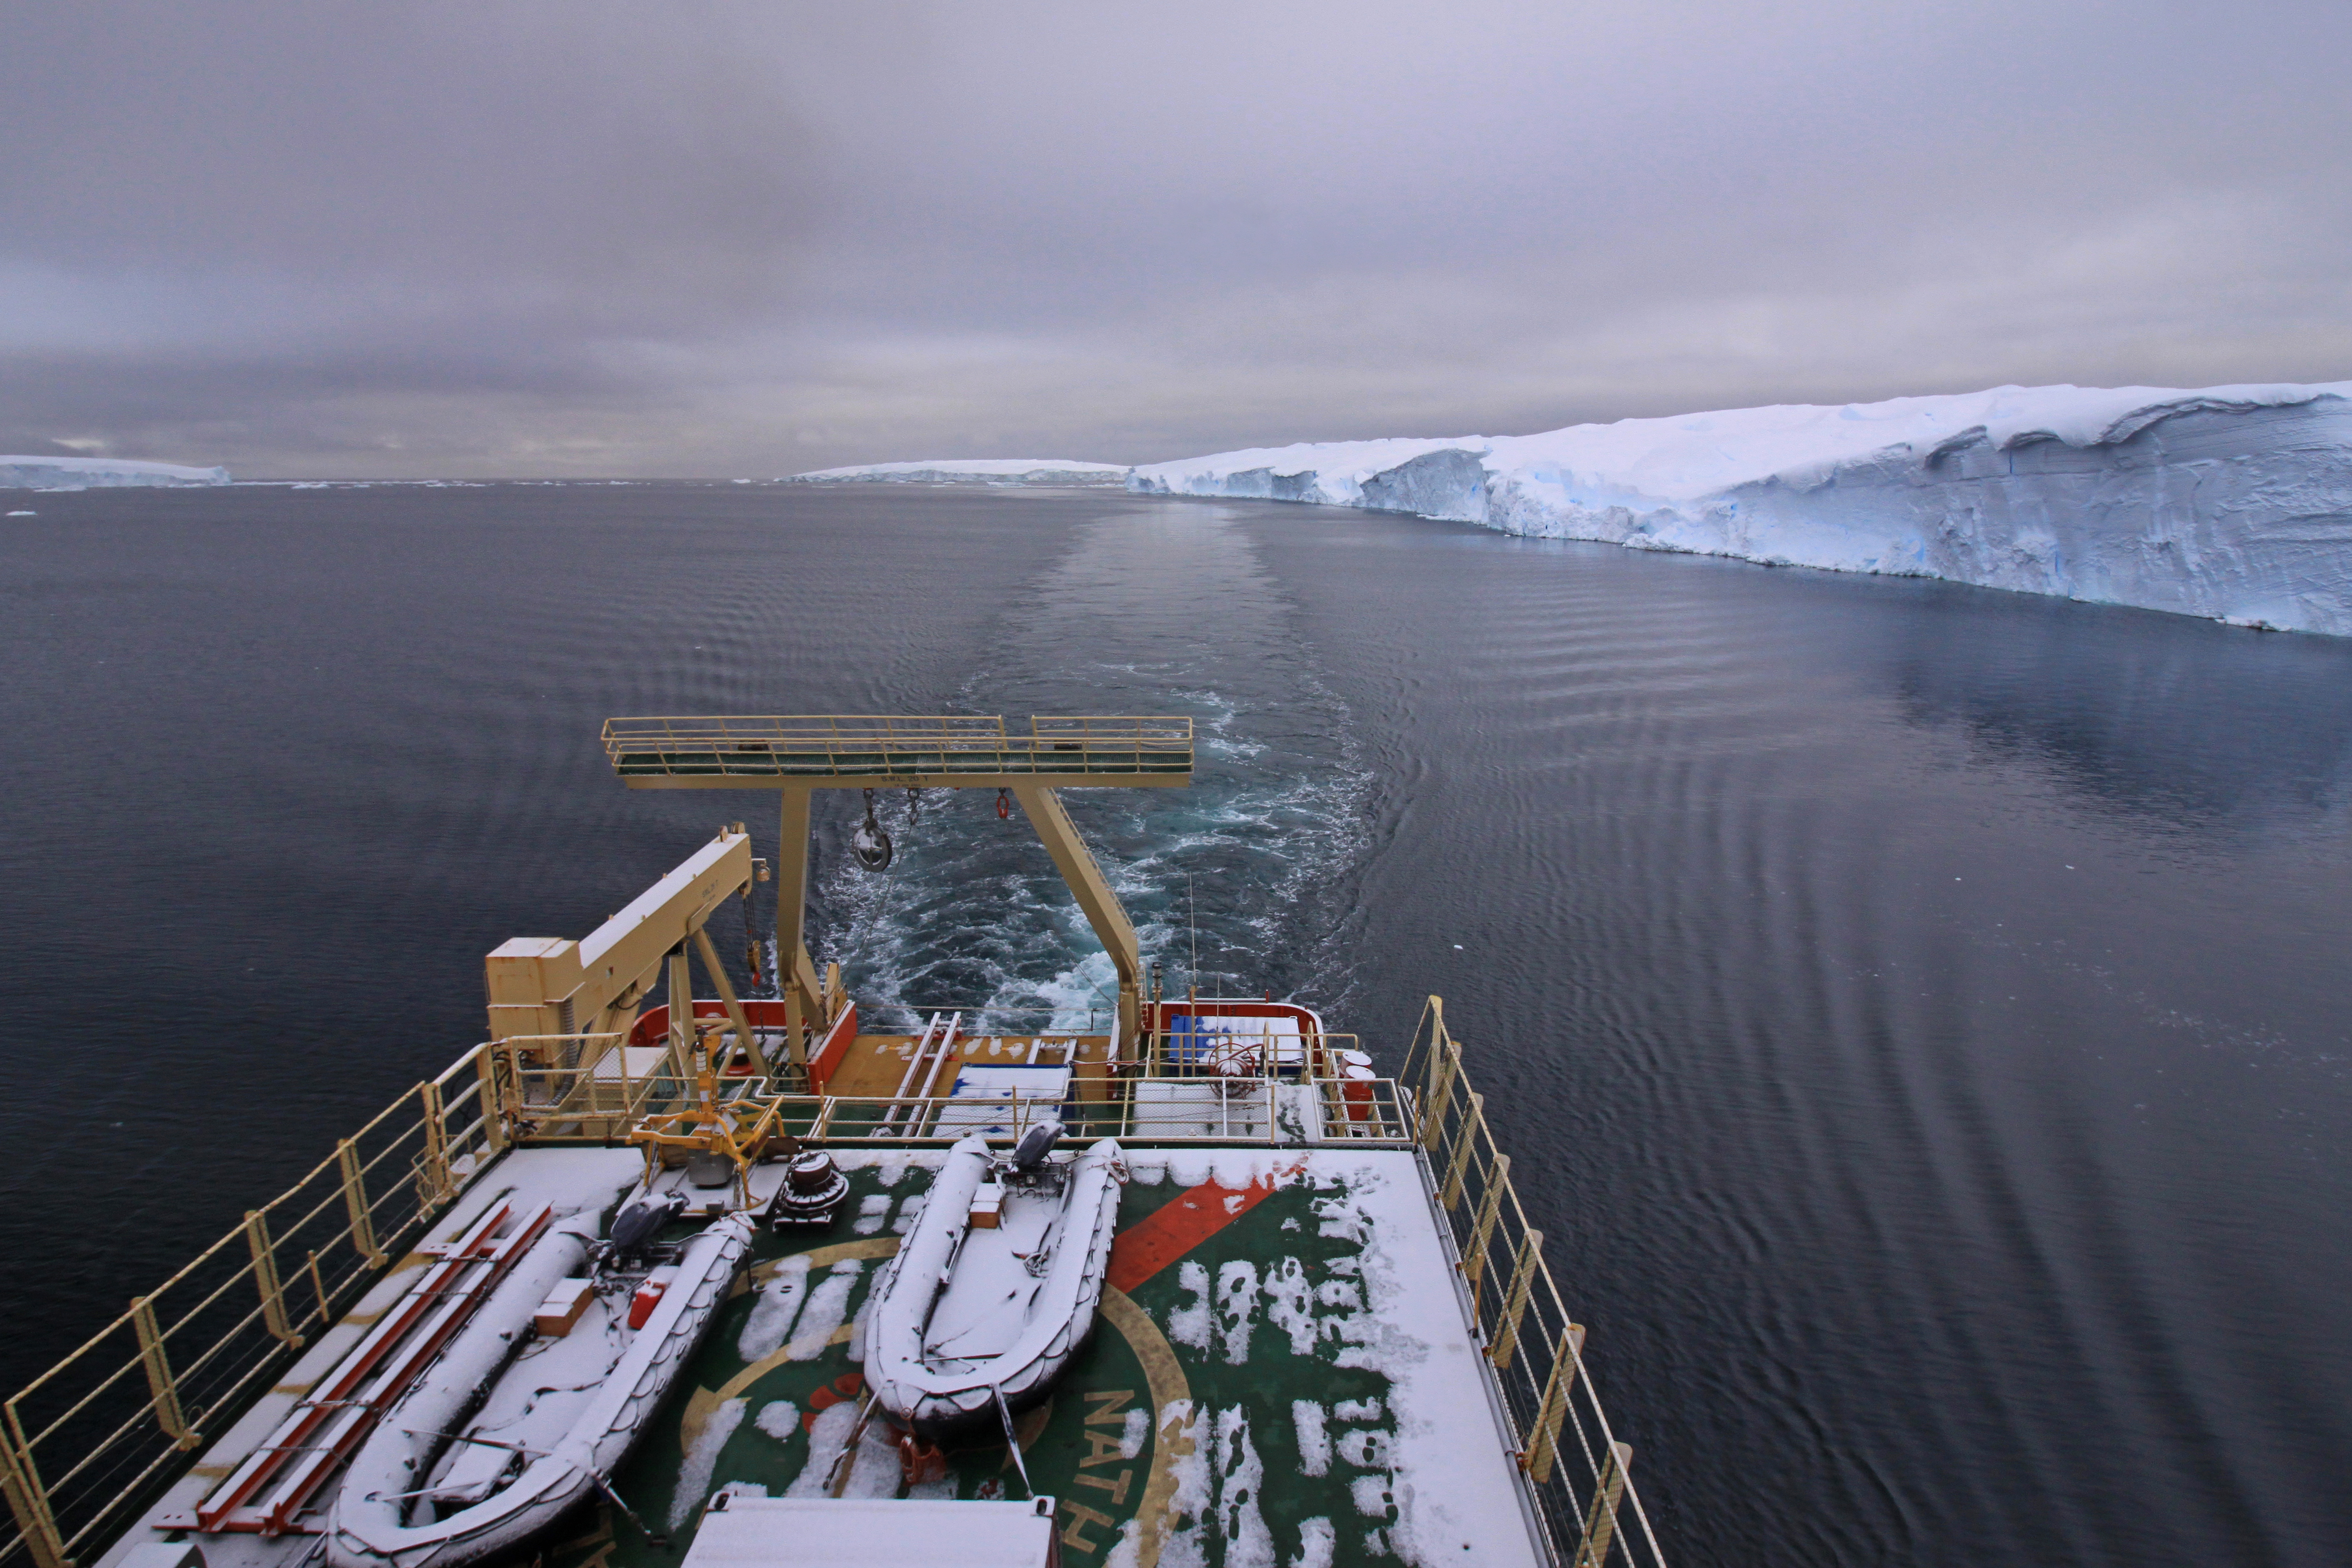 The Research Vessel/Icebreaker Nathaniel B. Palmer sails past the Thwaites Glacier floating ice shelf